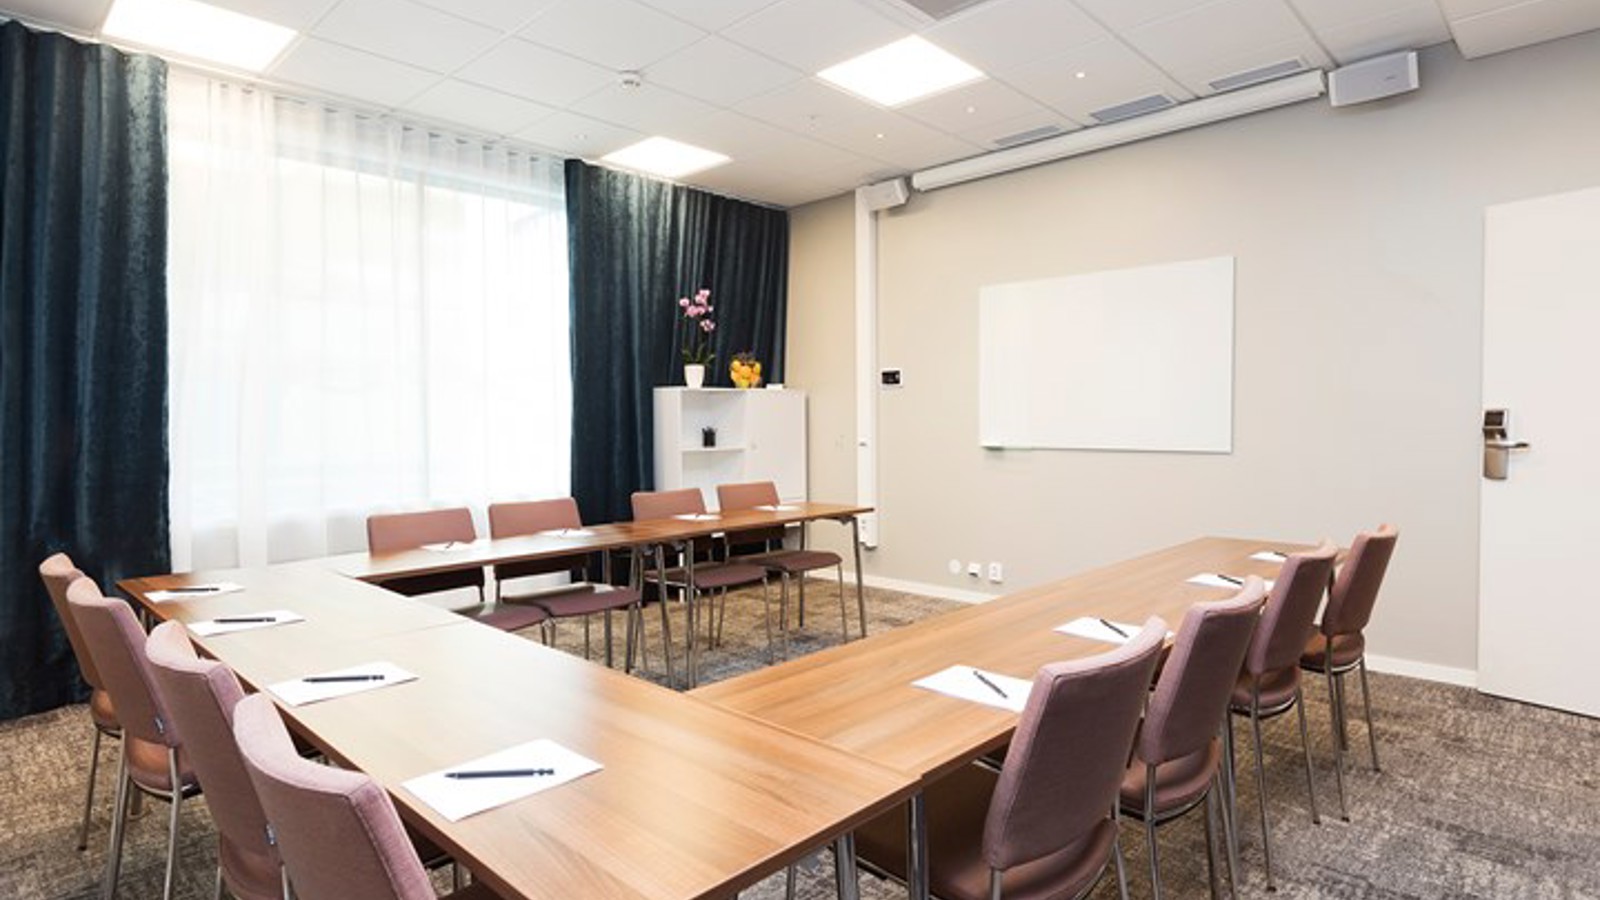 Conference room with U-shaped seating, wooden tables, light walls, dark curtains